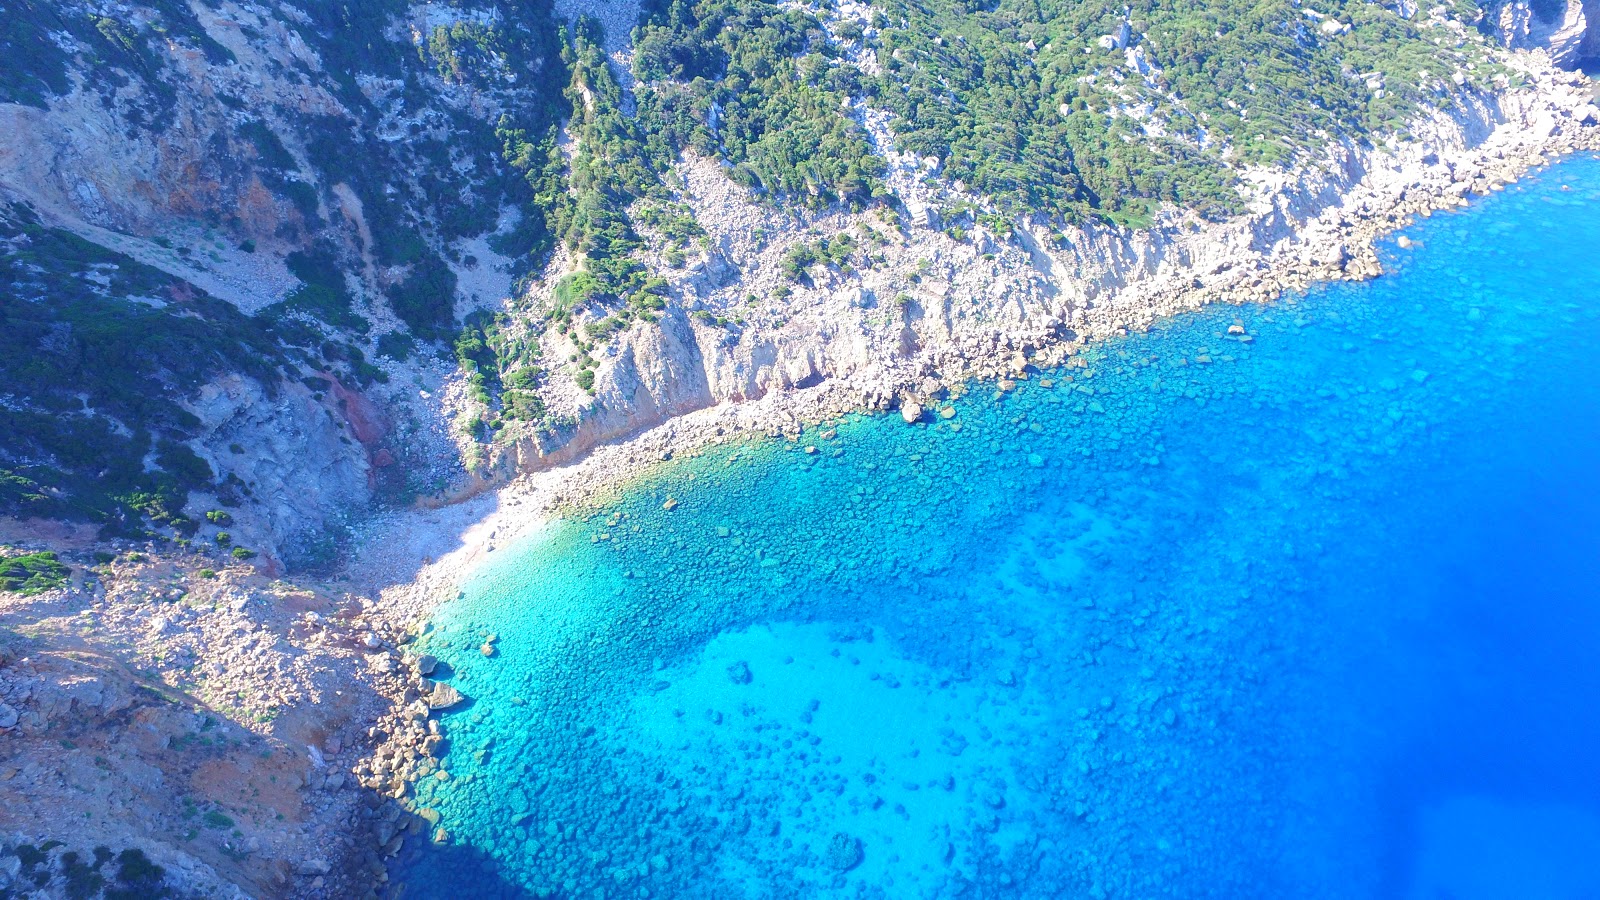 Photo of Spiaggia di San Lorenzo with turquoise pure water surface